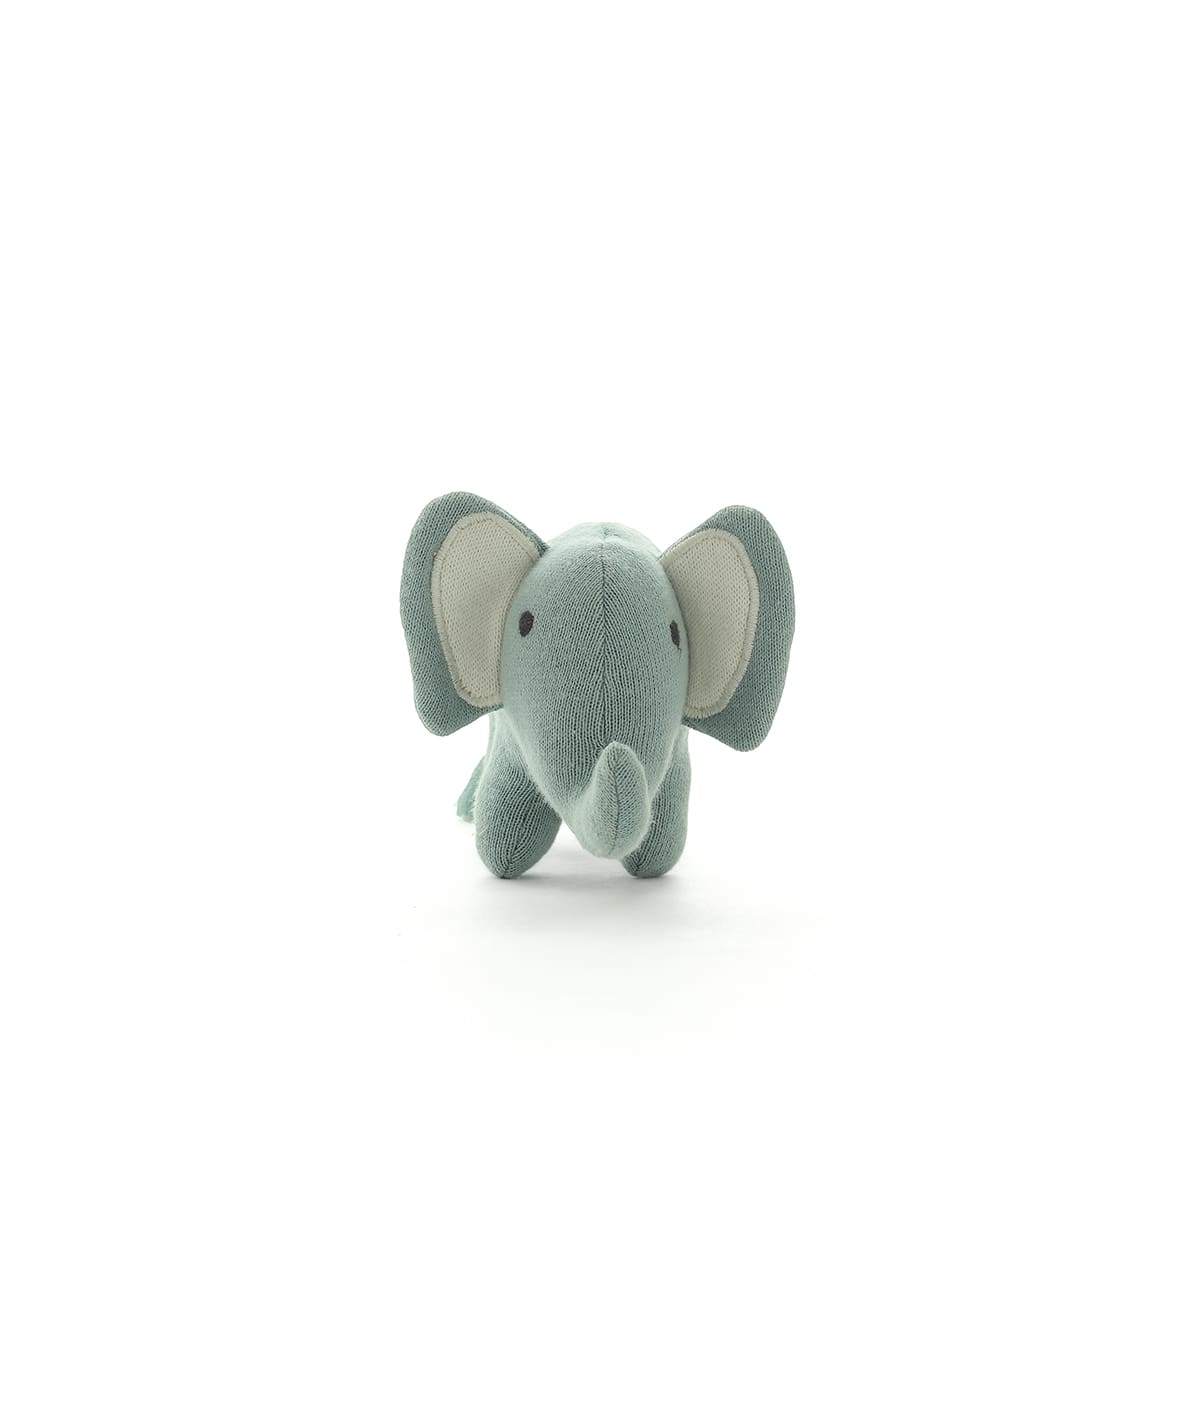 Harris the Elephant- Cotton Knitted Stuffed Soft Rattle Toy (Dull Blue)